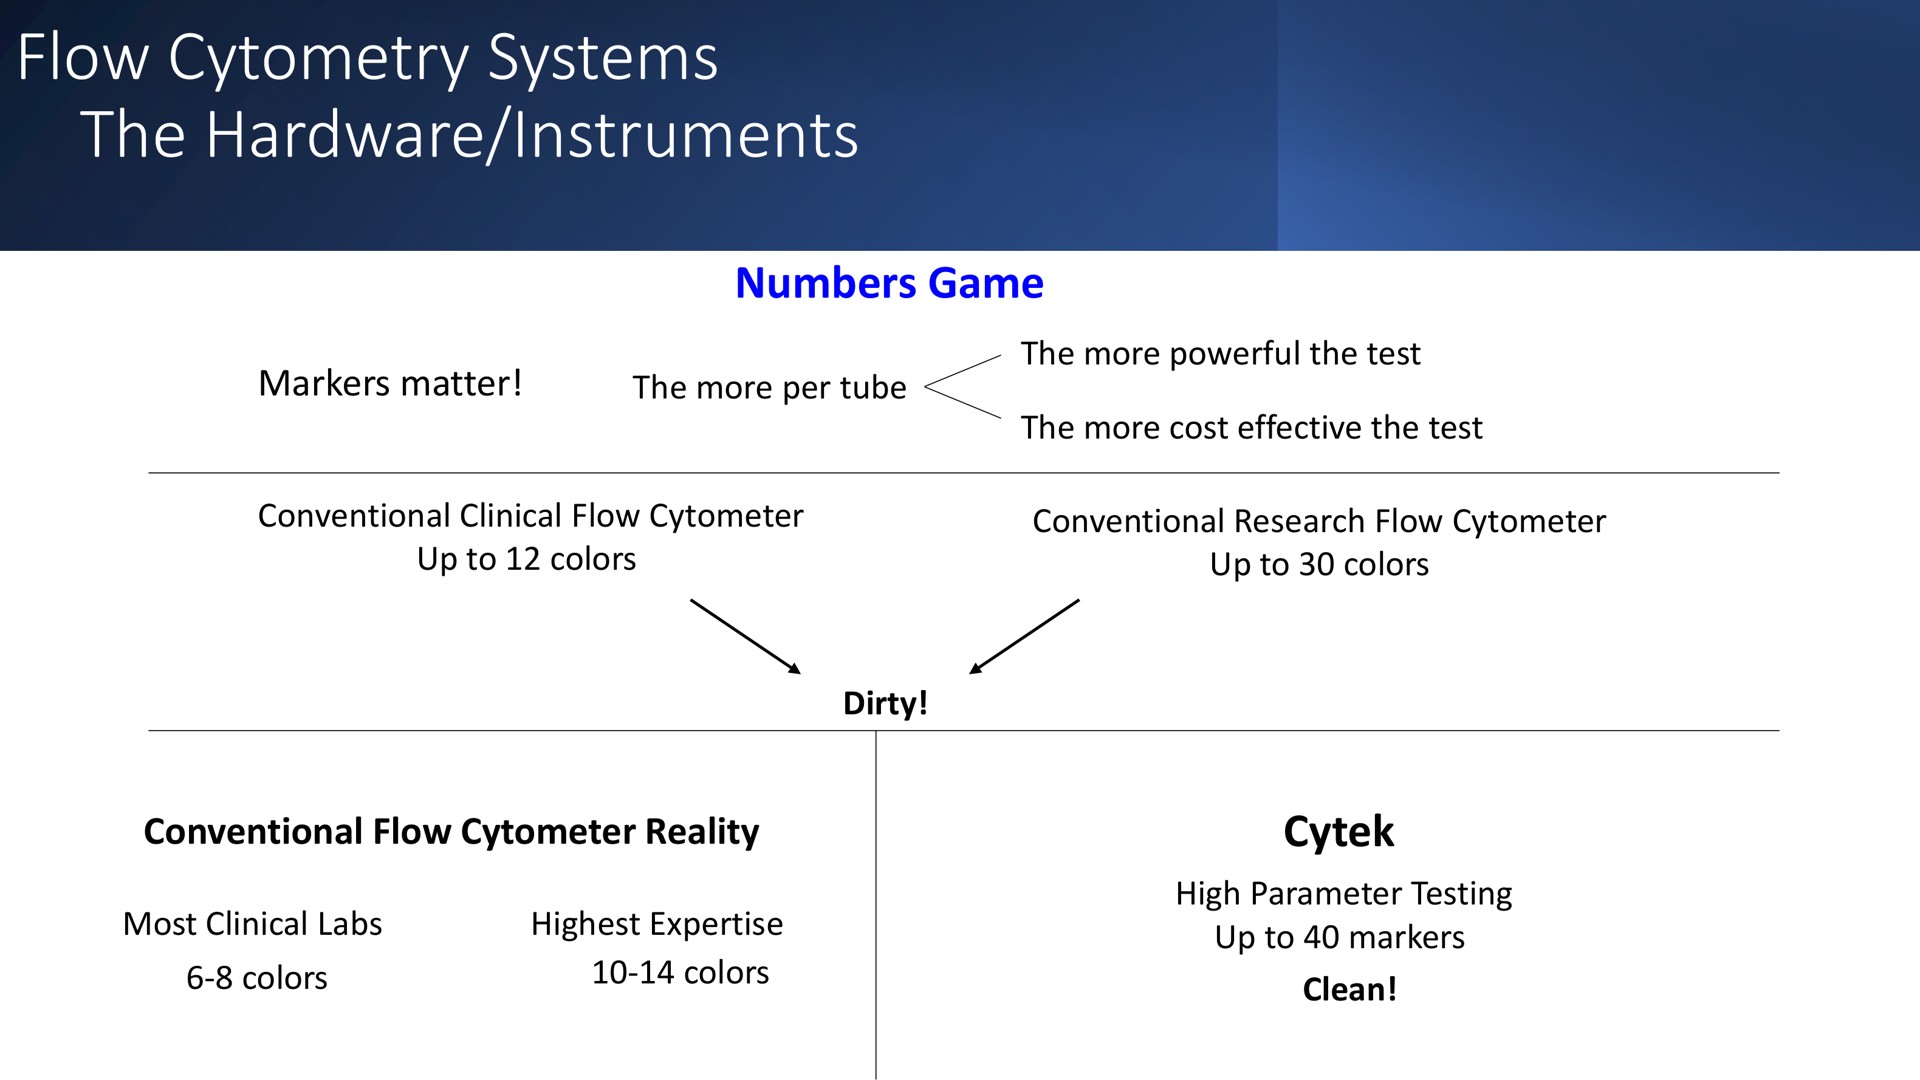 flow systems the hardware instruments conventional cytometer reality | Cytek